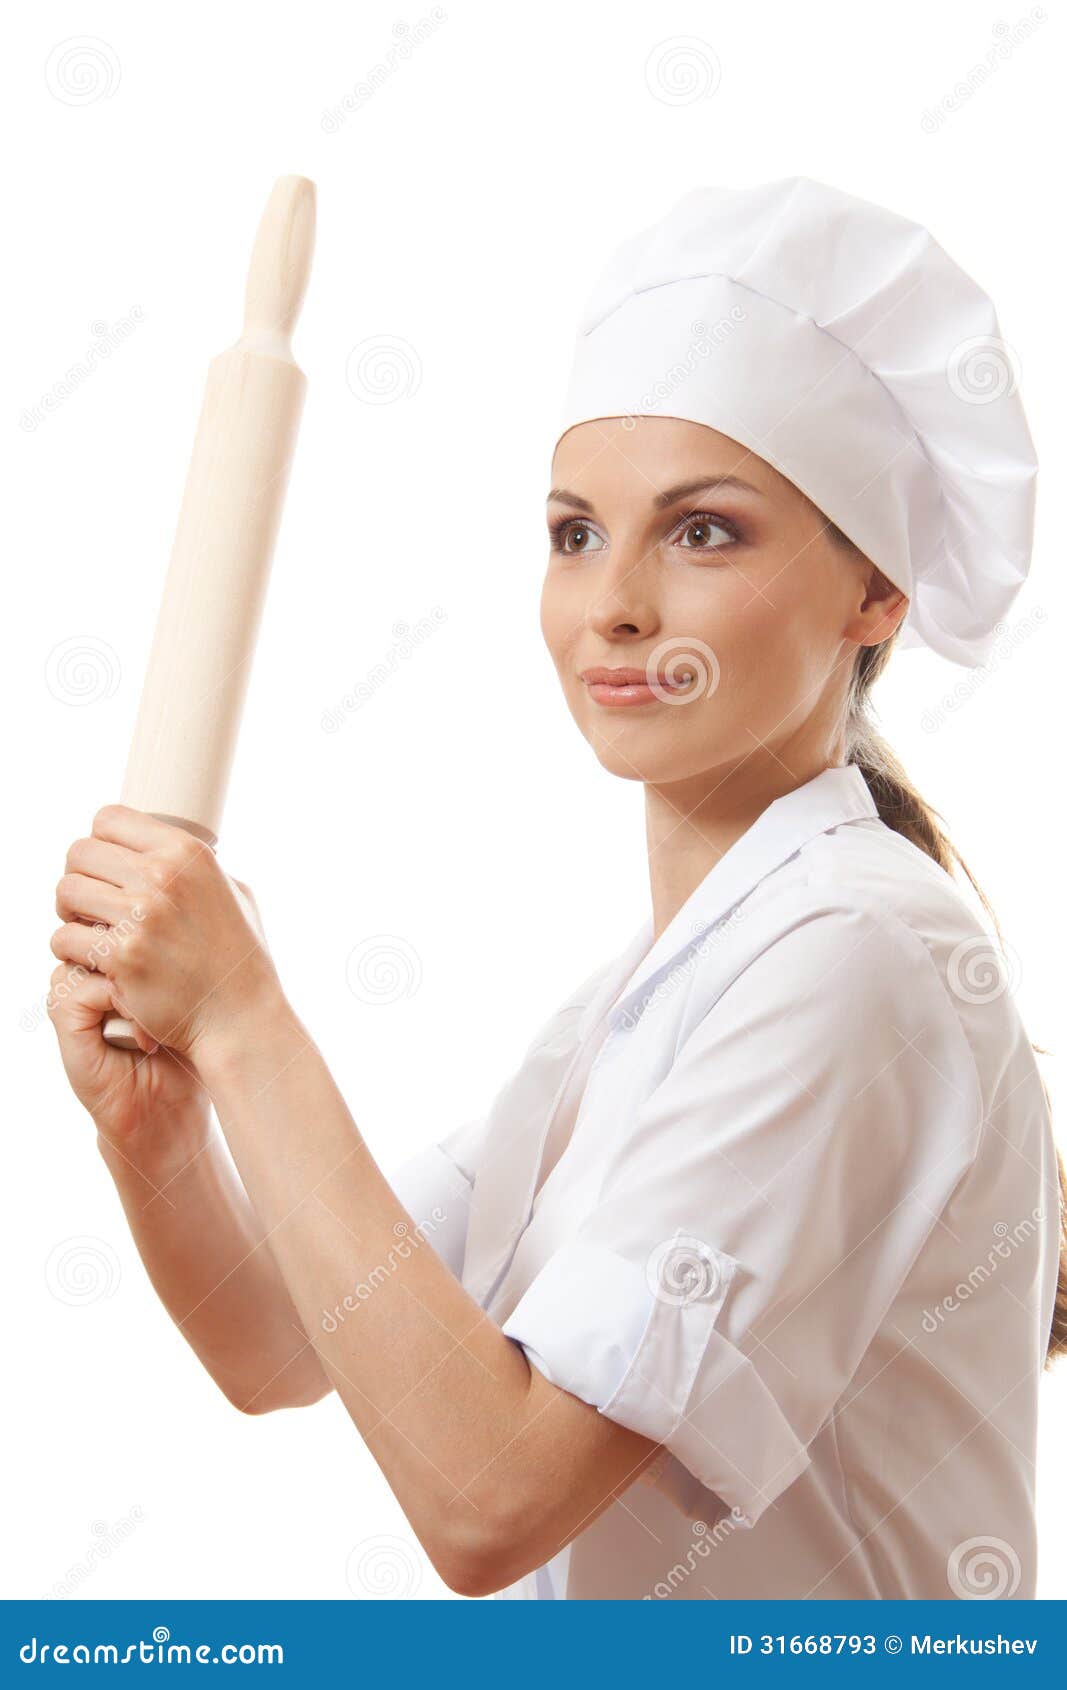 Baker / Chef Woman Holding Baking Rolling Pin Stock Photos - Image ...